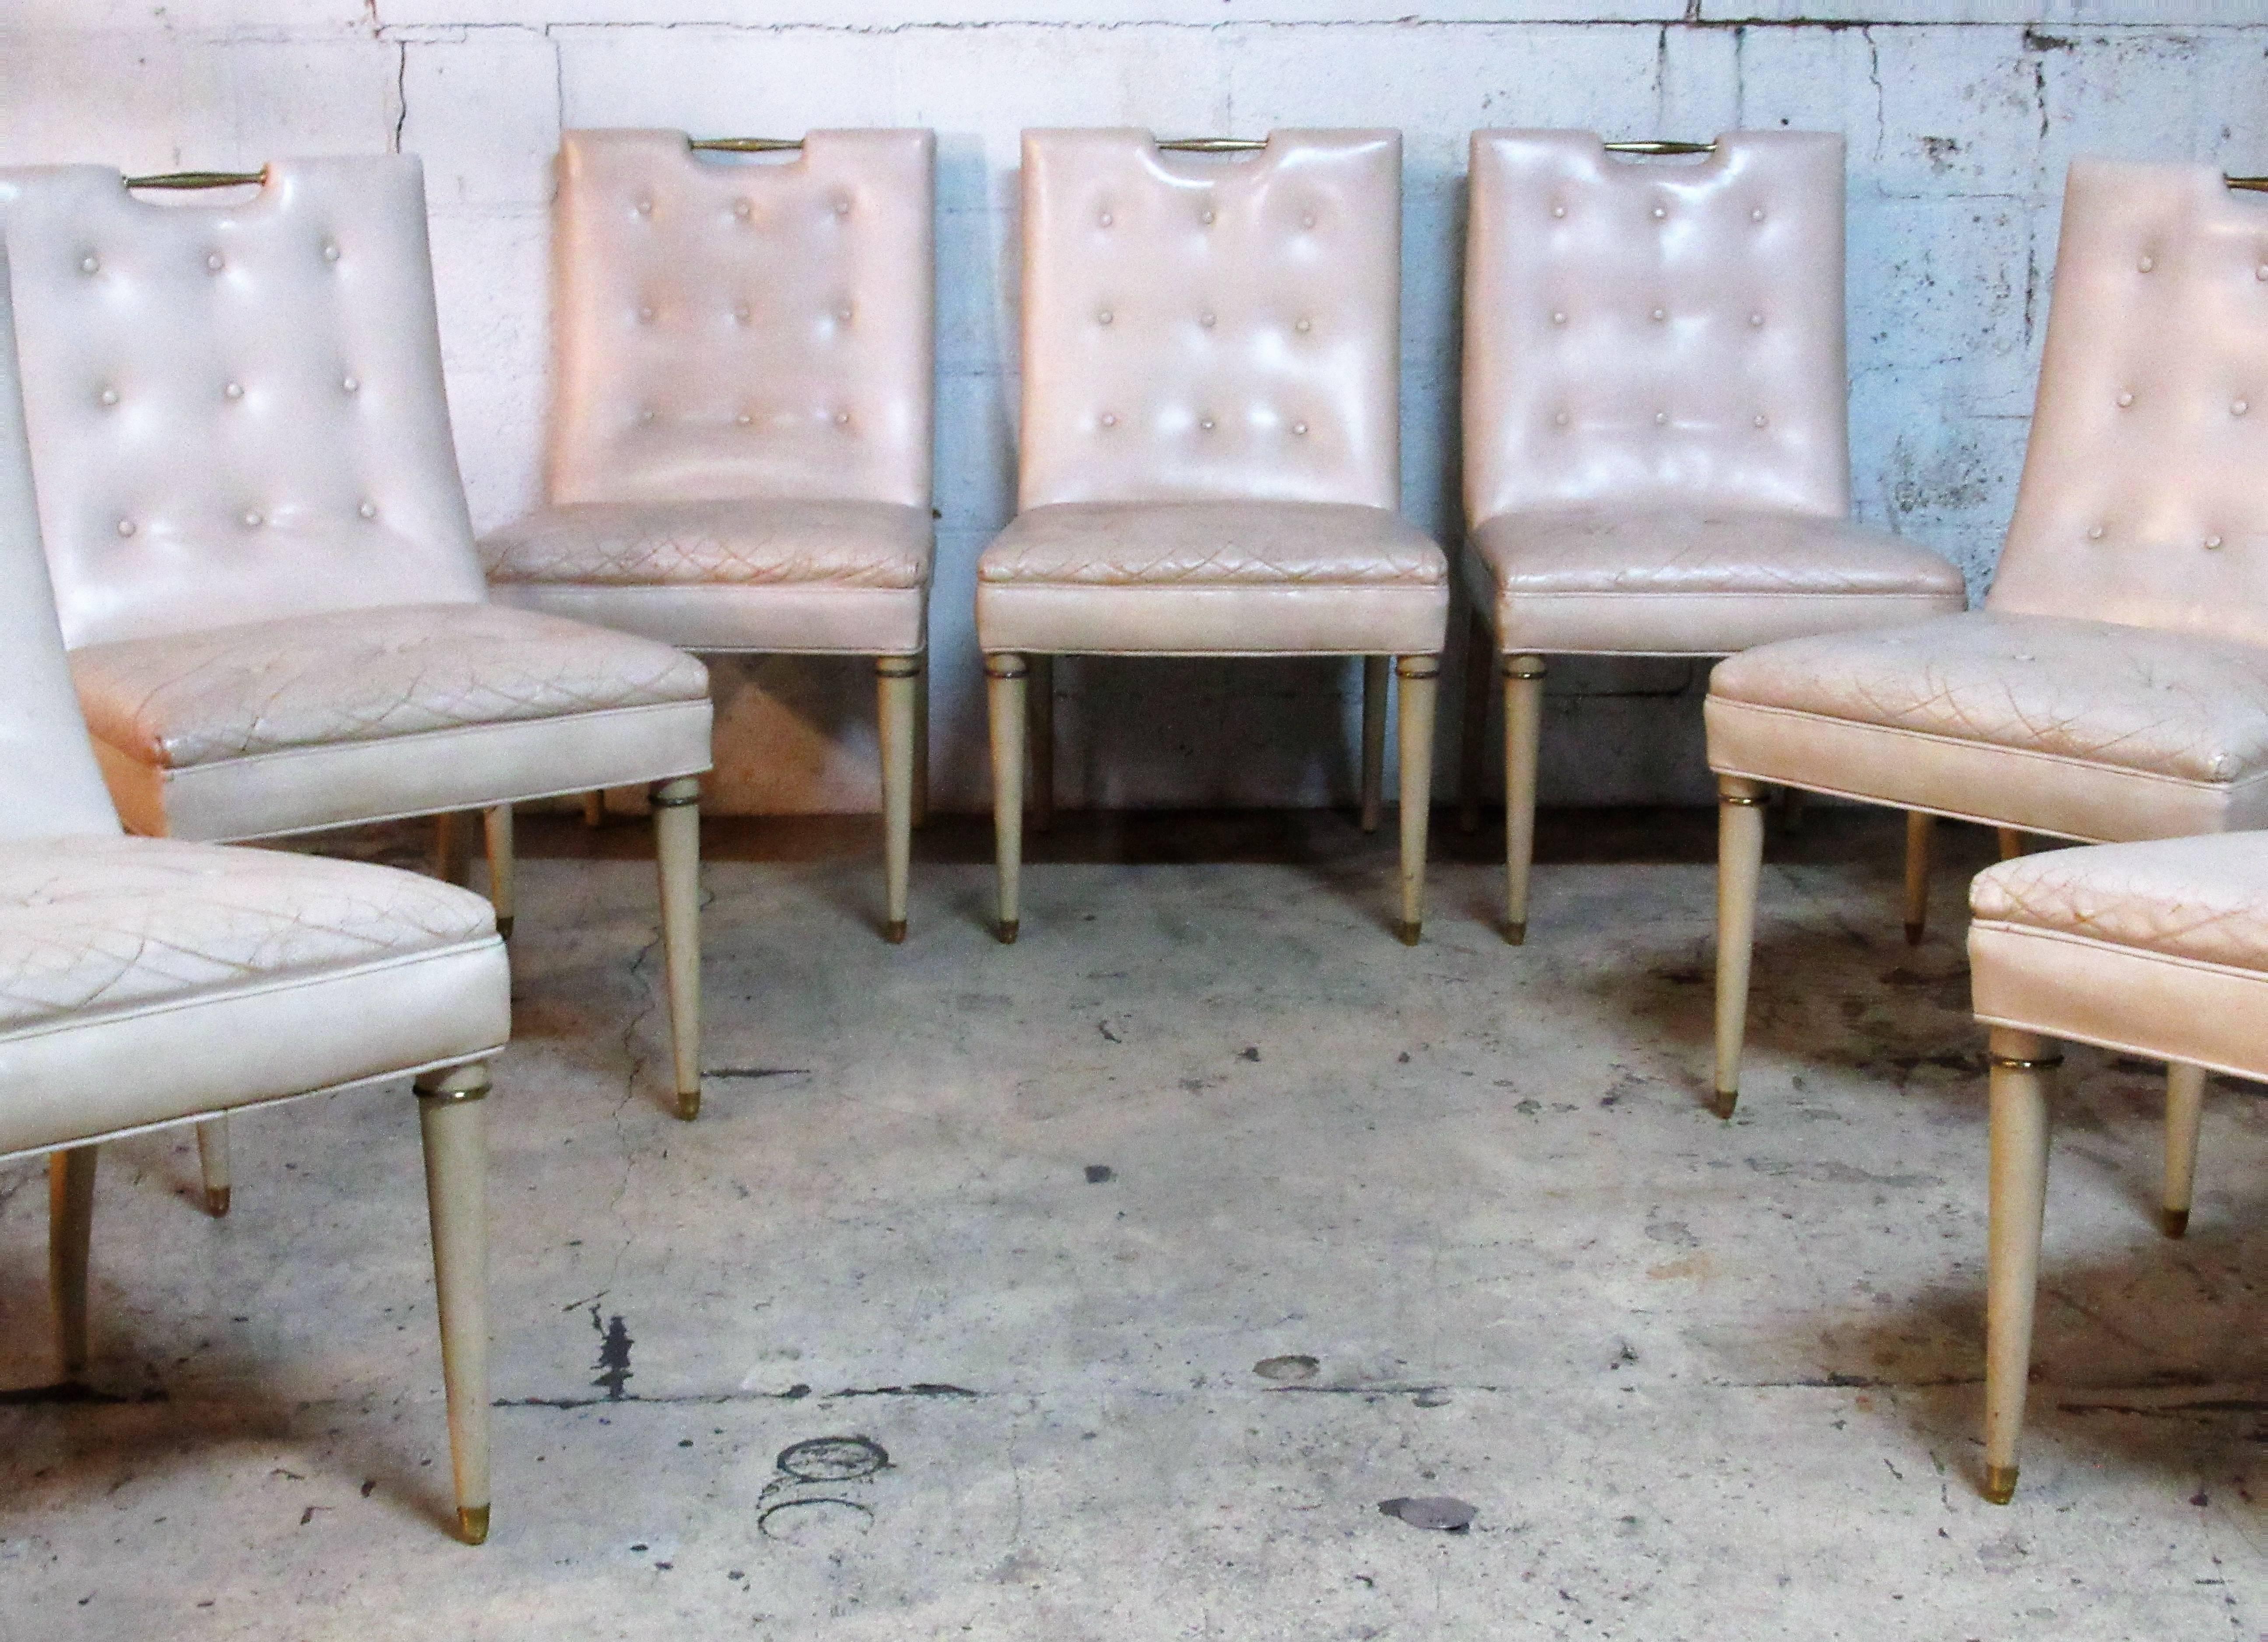 A set of eight all original early Hollywood Regency dining chairs with very pale pink leather button tufted upholstery and a bone colored parchment finish to the brass-mounted wood frame. Sleek sculptural glamorous and exceptionally beautiful. See